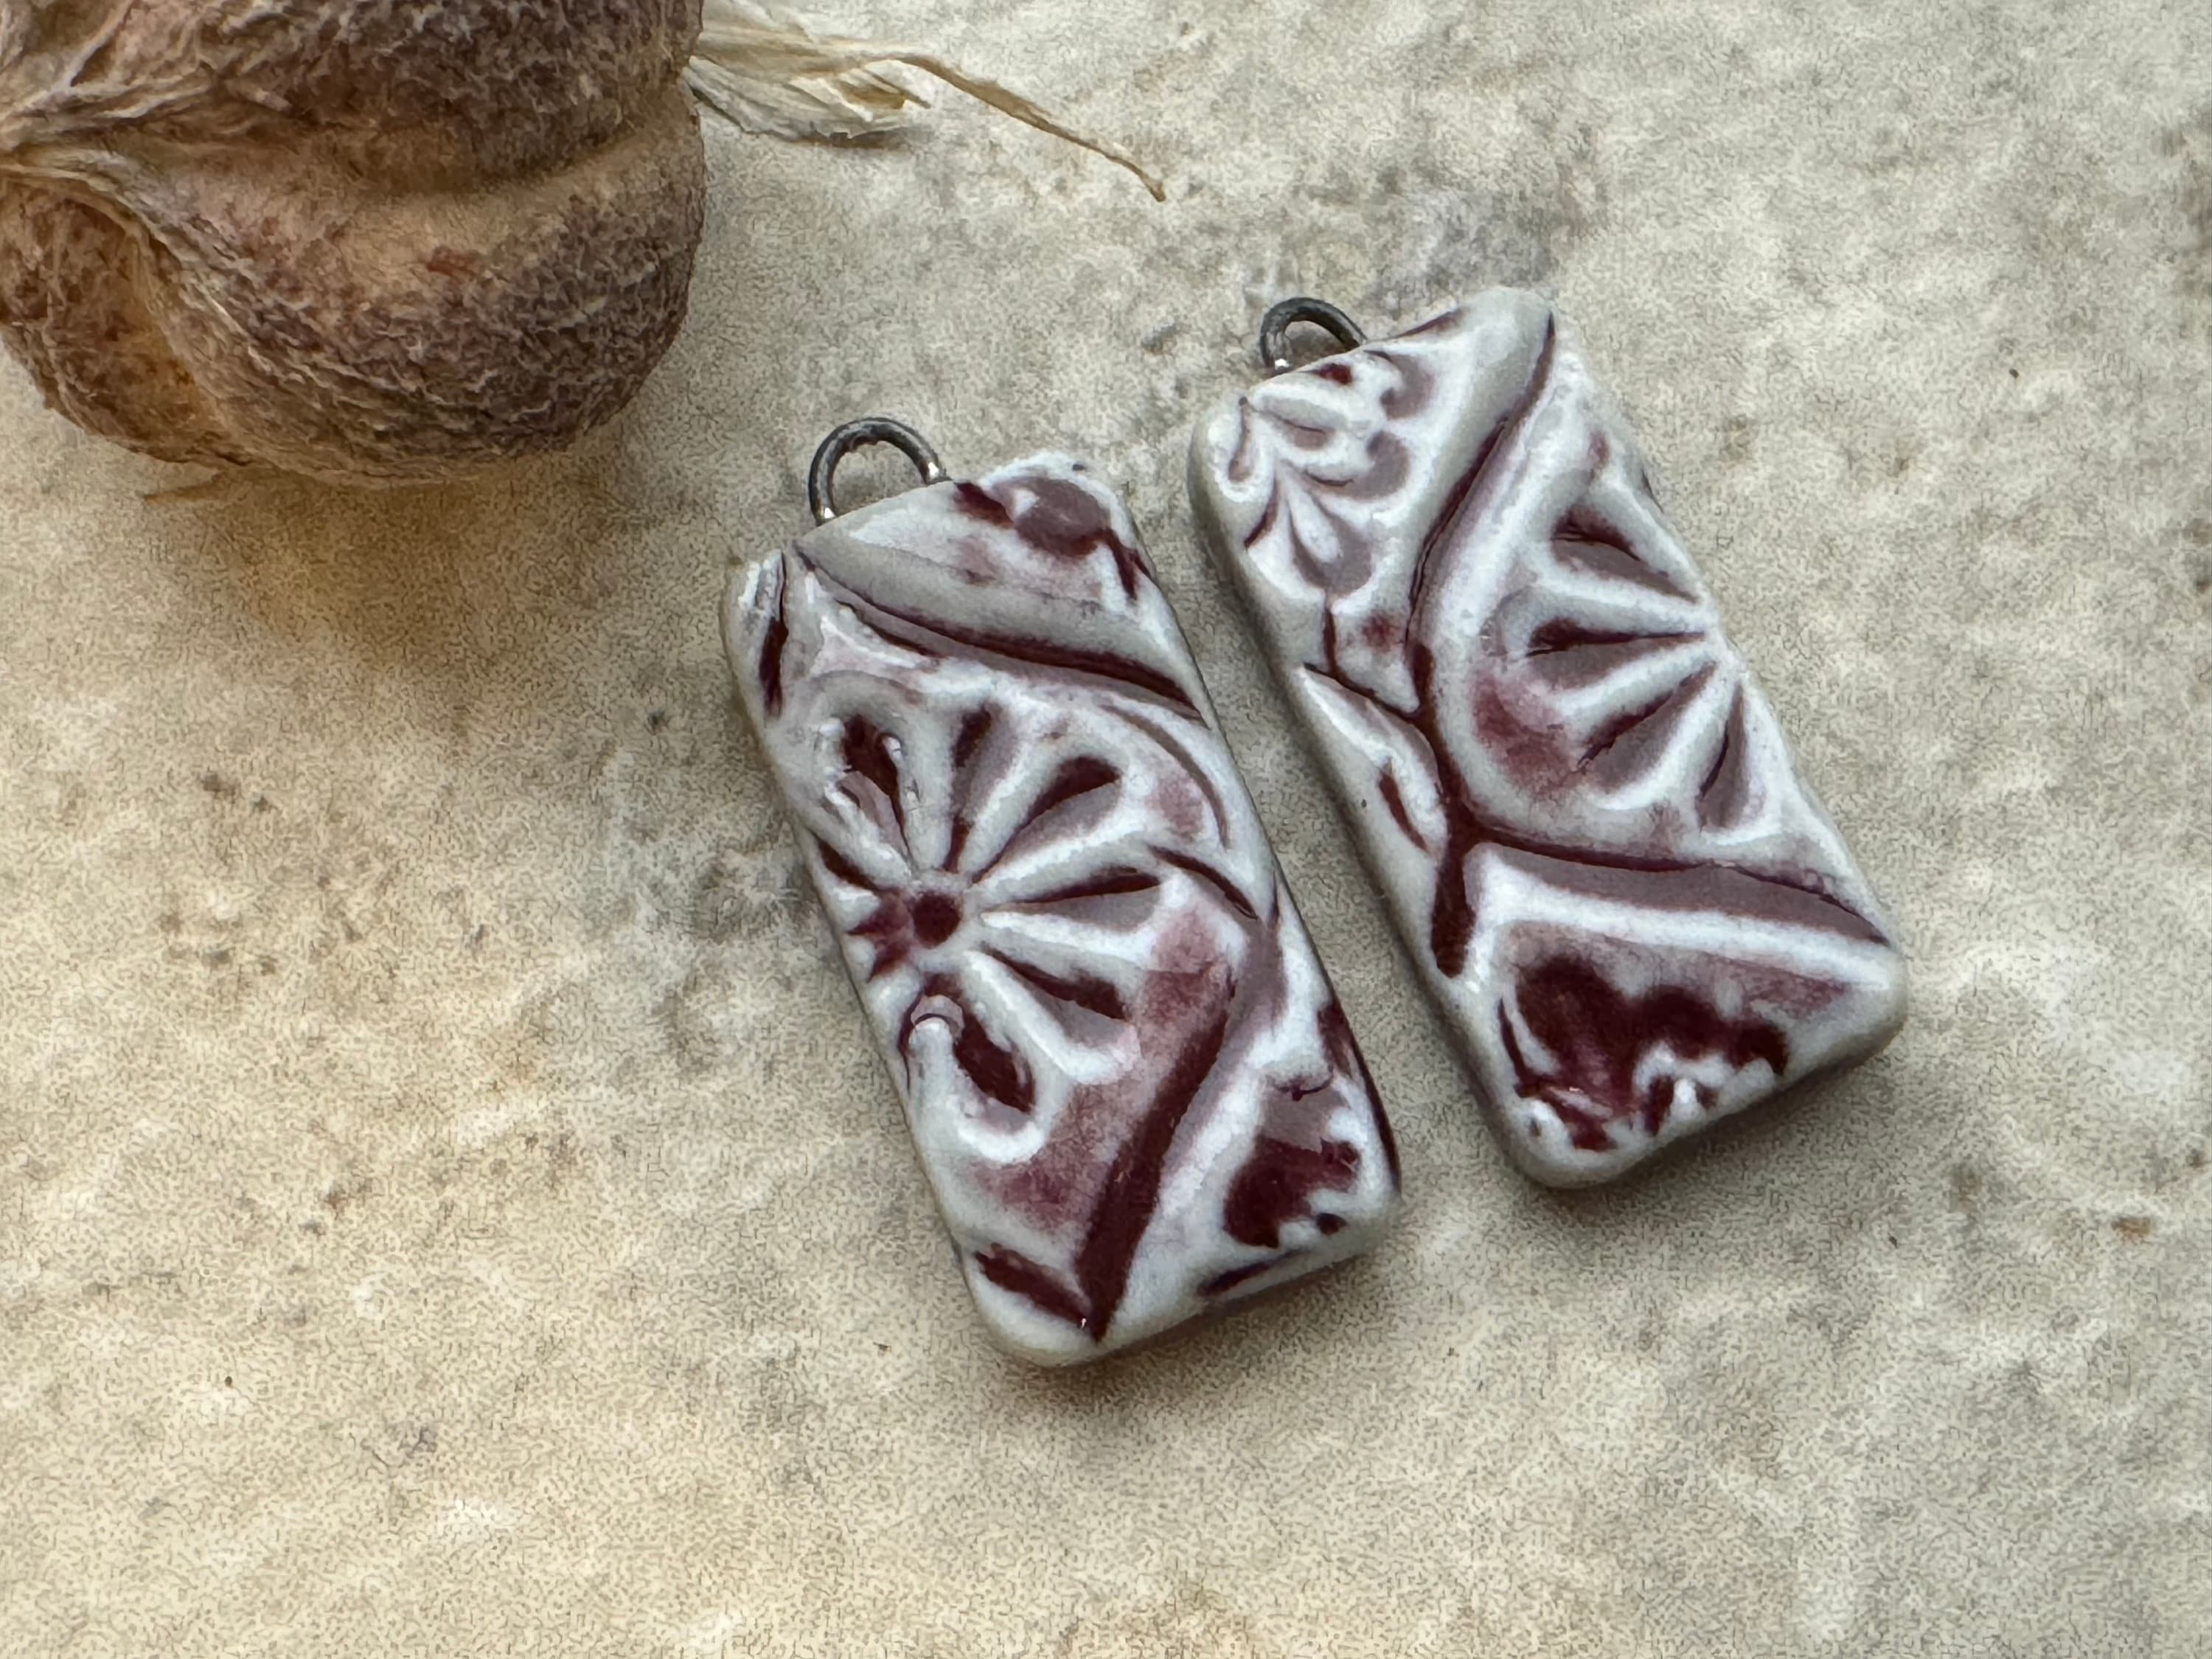 Burgundy Talavera Bead, Mexican Style Tile Beads, Earring Bead Pair, Porcelain Ceramic Charms, Jewelry Components, Beading Handmade